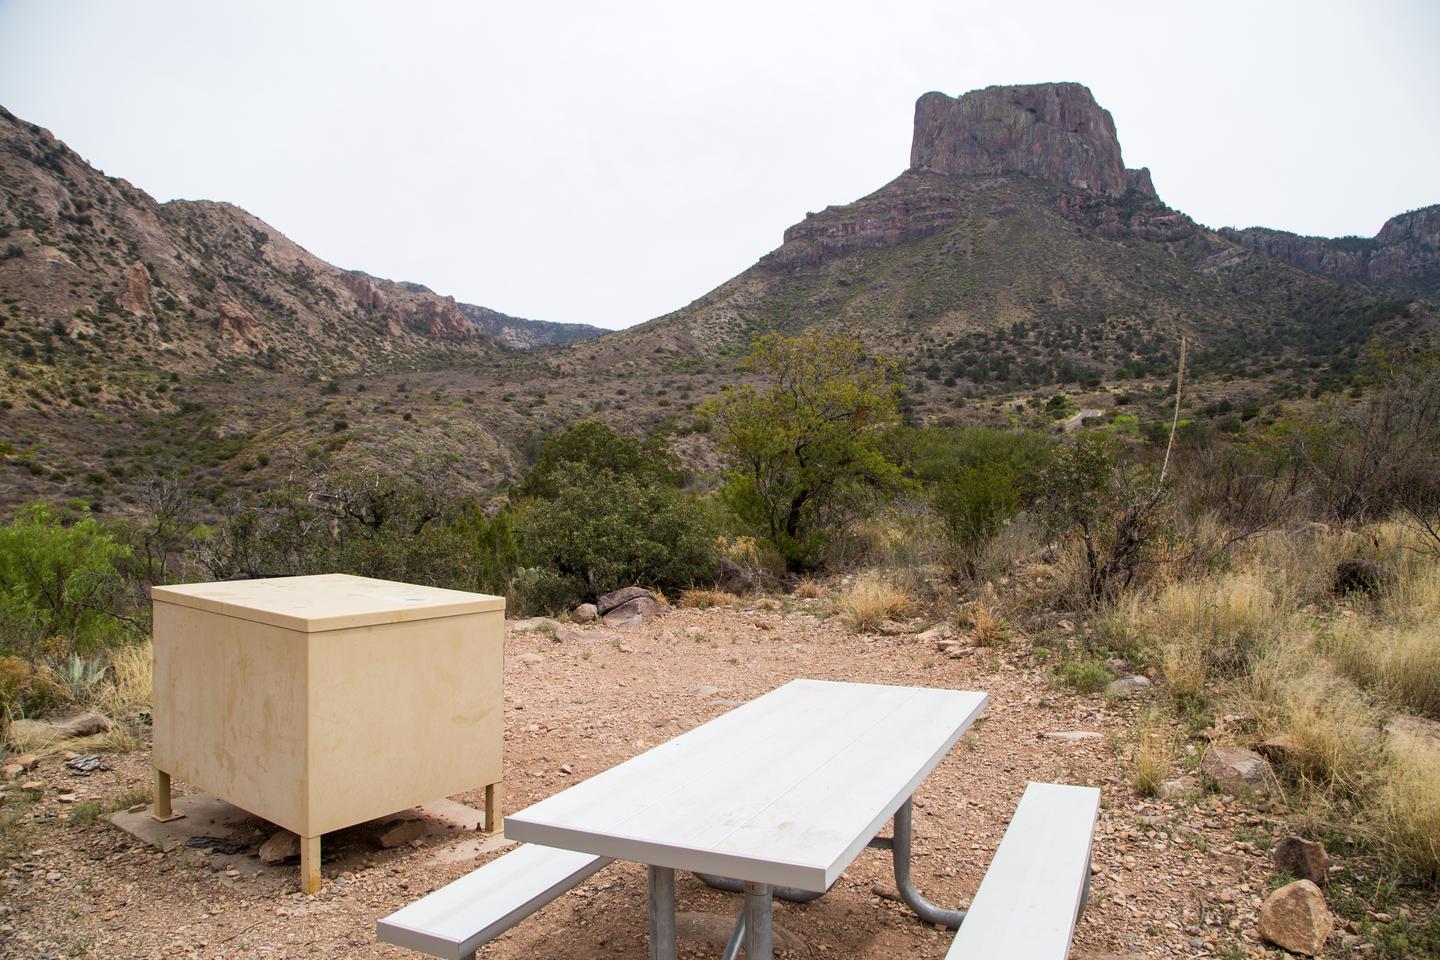 Rocky site with a view - picnic table, bear box and raised grill